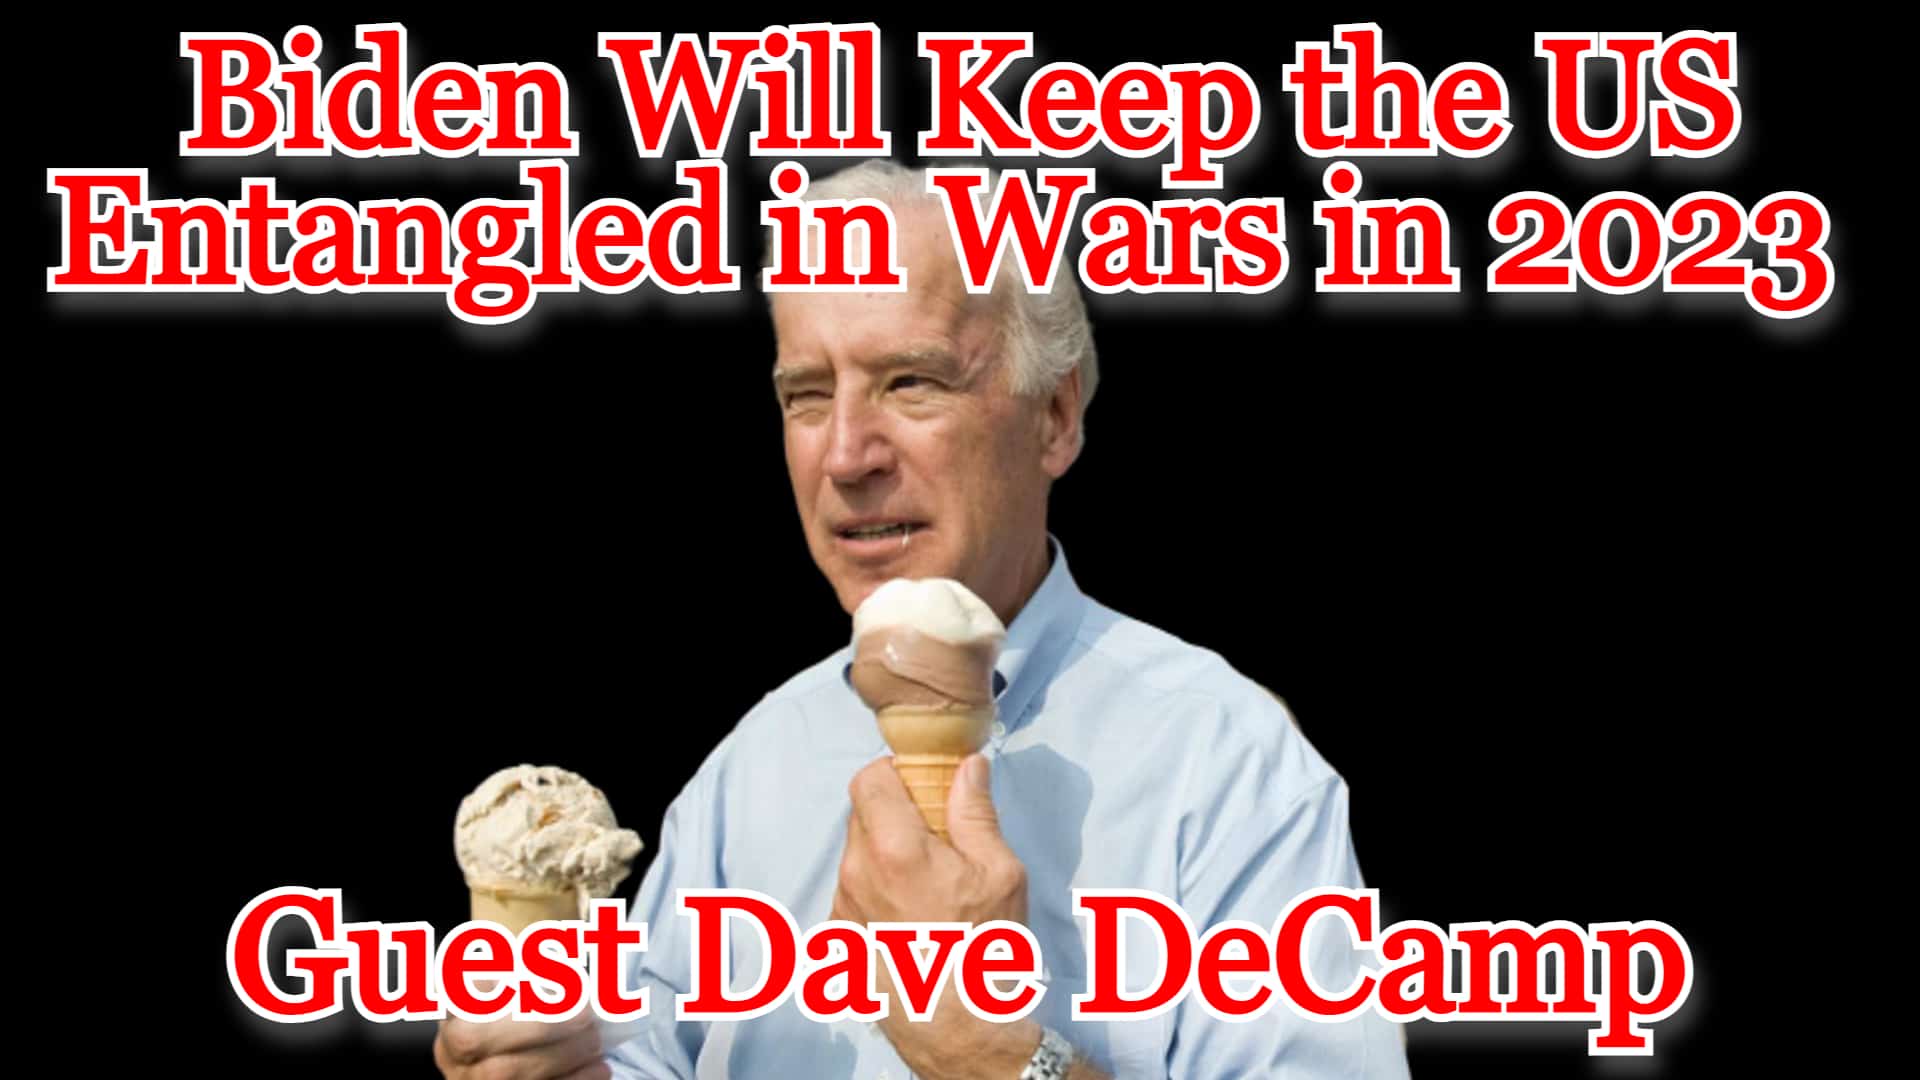 COI #371: Biden Will Keep the US Entangled in Wars in 2023 guest Dave DeCamp